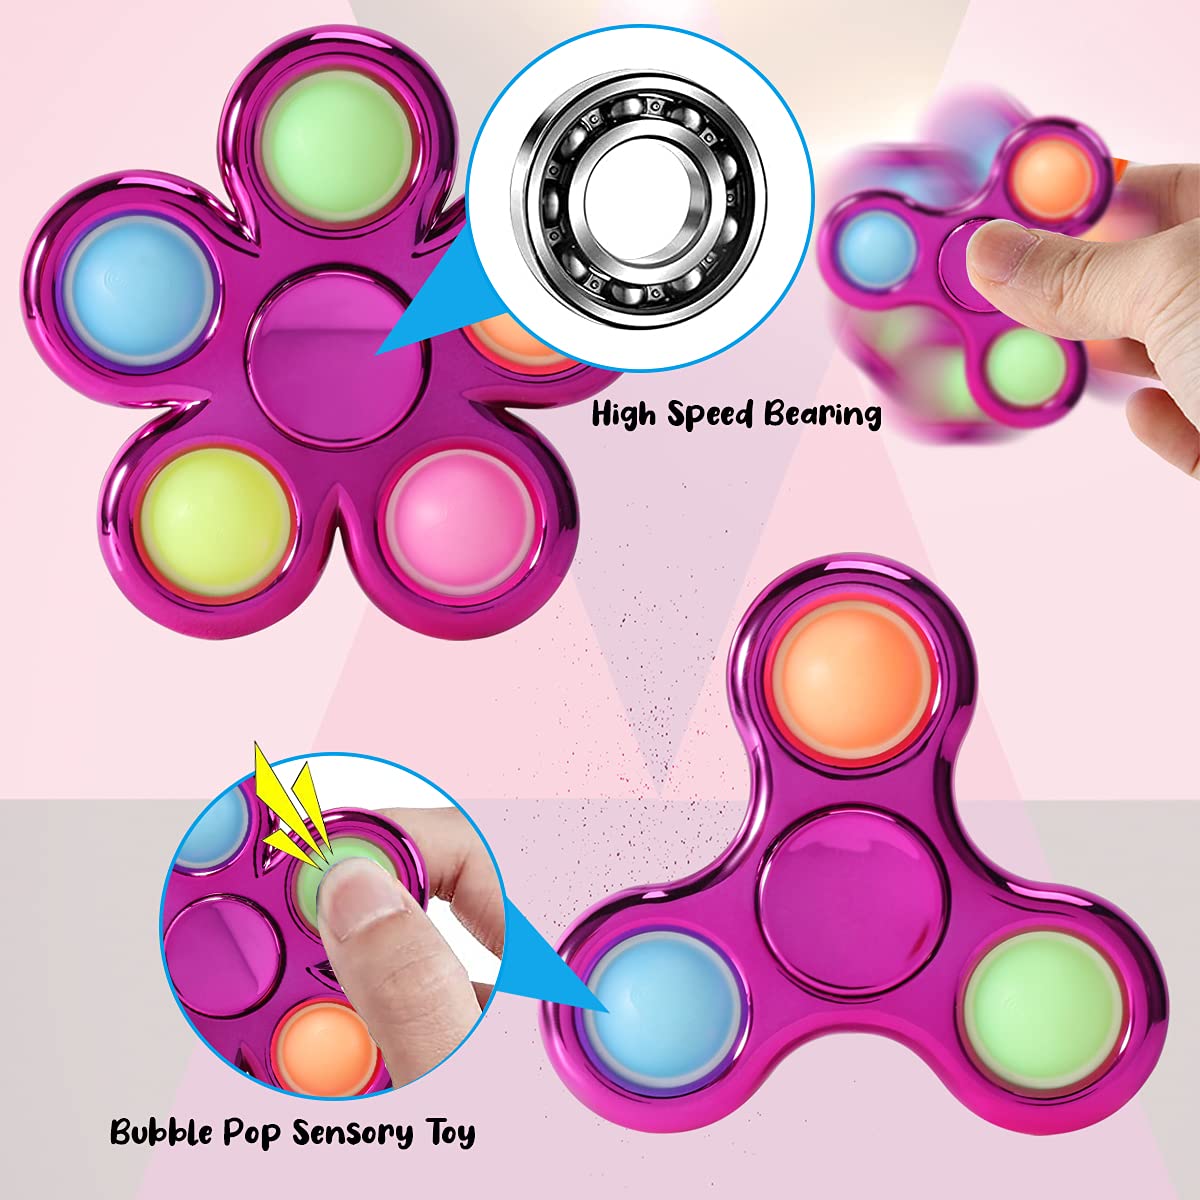 FIGROL Pop Simple Fidget Spinner 3 Pack, Push Bubble Metal-Looking Fidget Spinners, Pop Bubble Rainbow Fidget Toys Spinners for ADHD Anxiety,Stress Relief Sensory Toy Party Favor for Kids